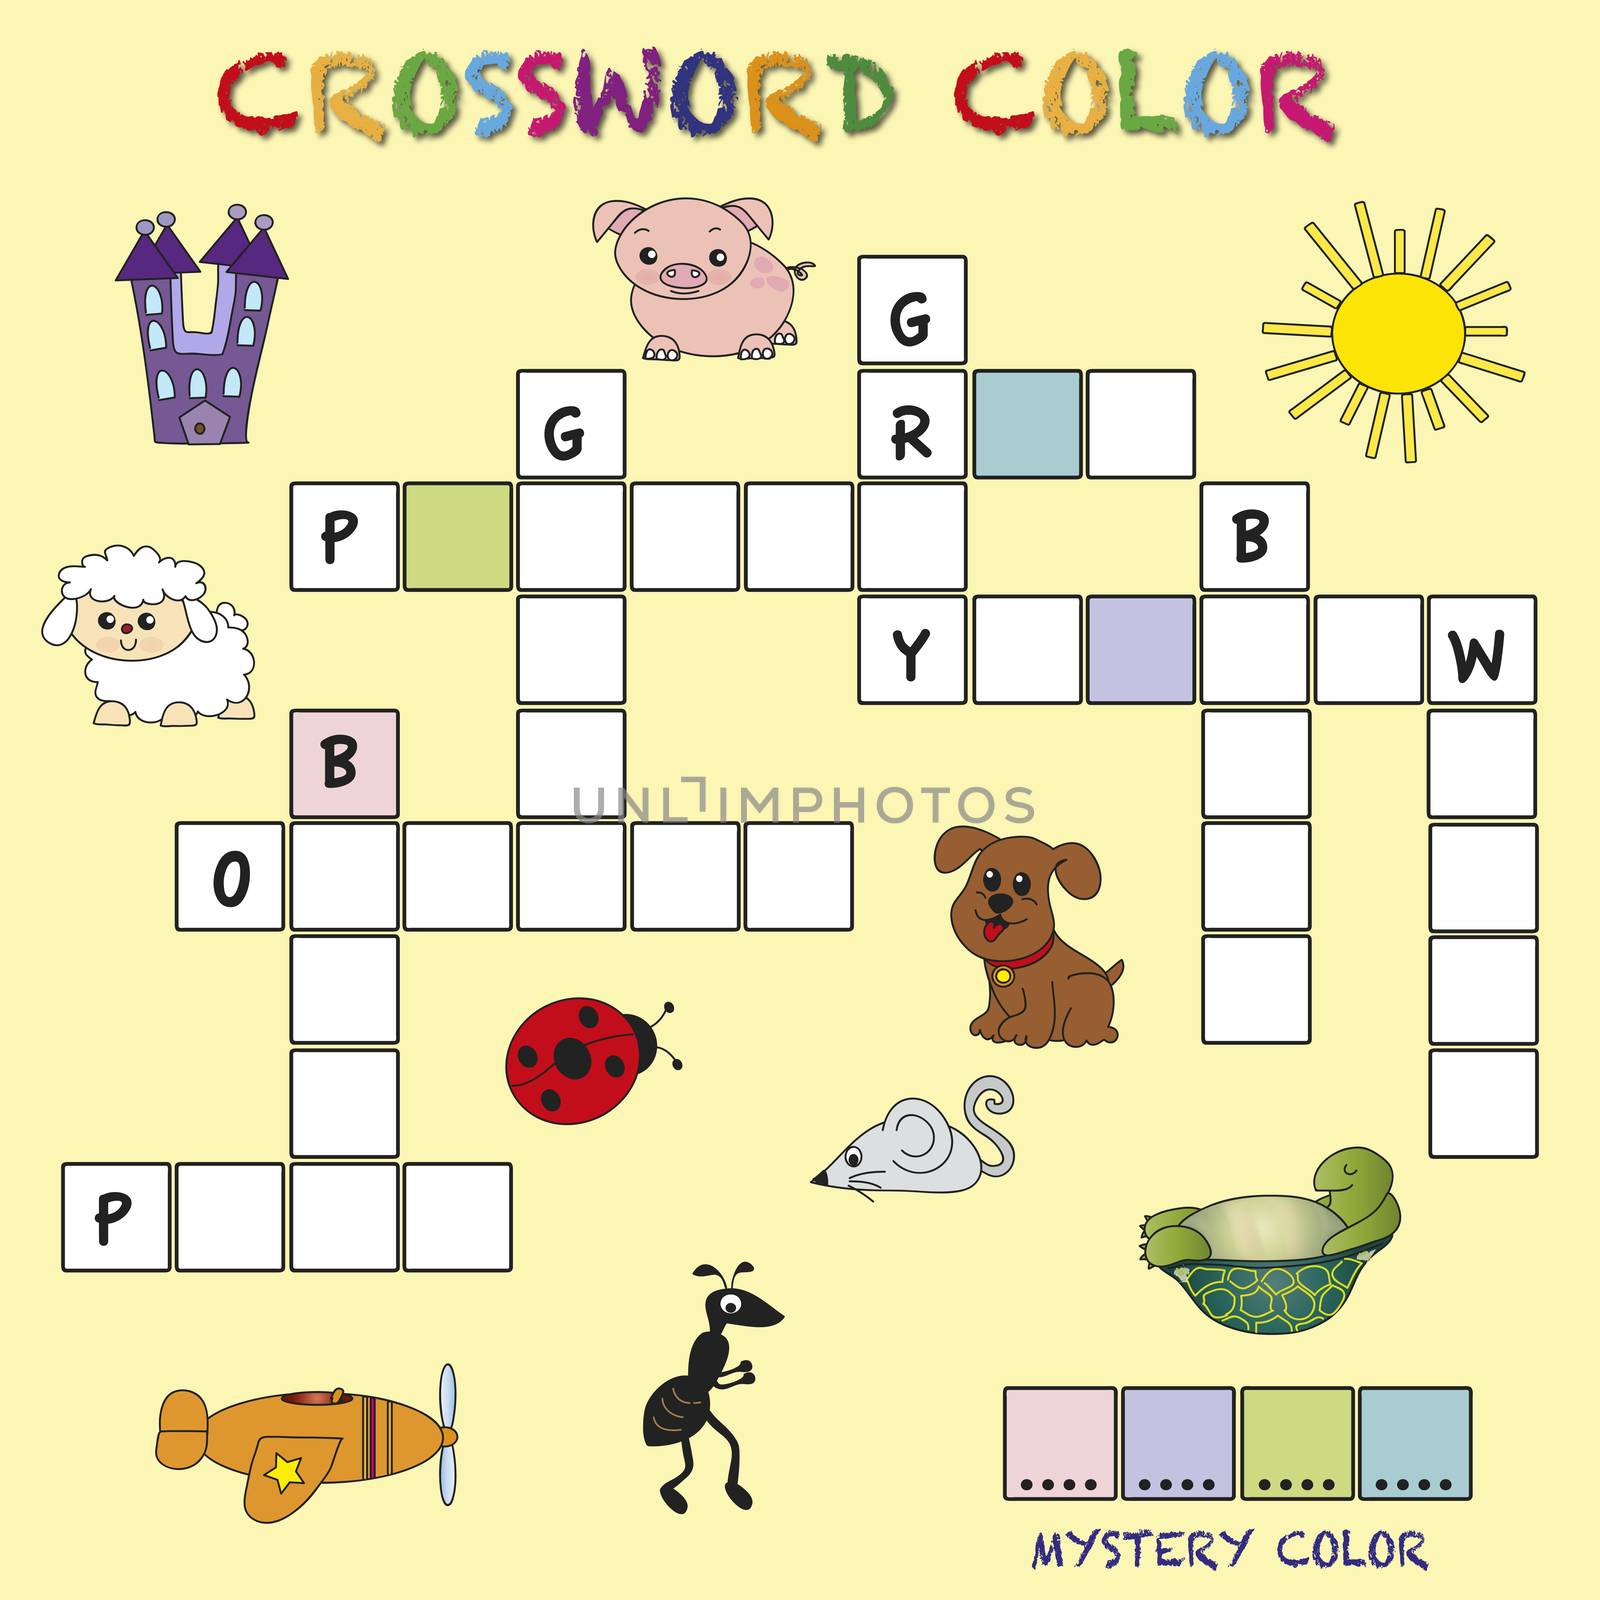 crossword color by millaus